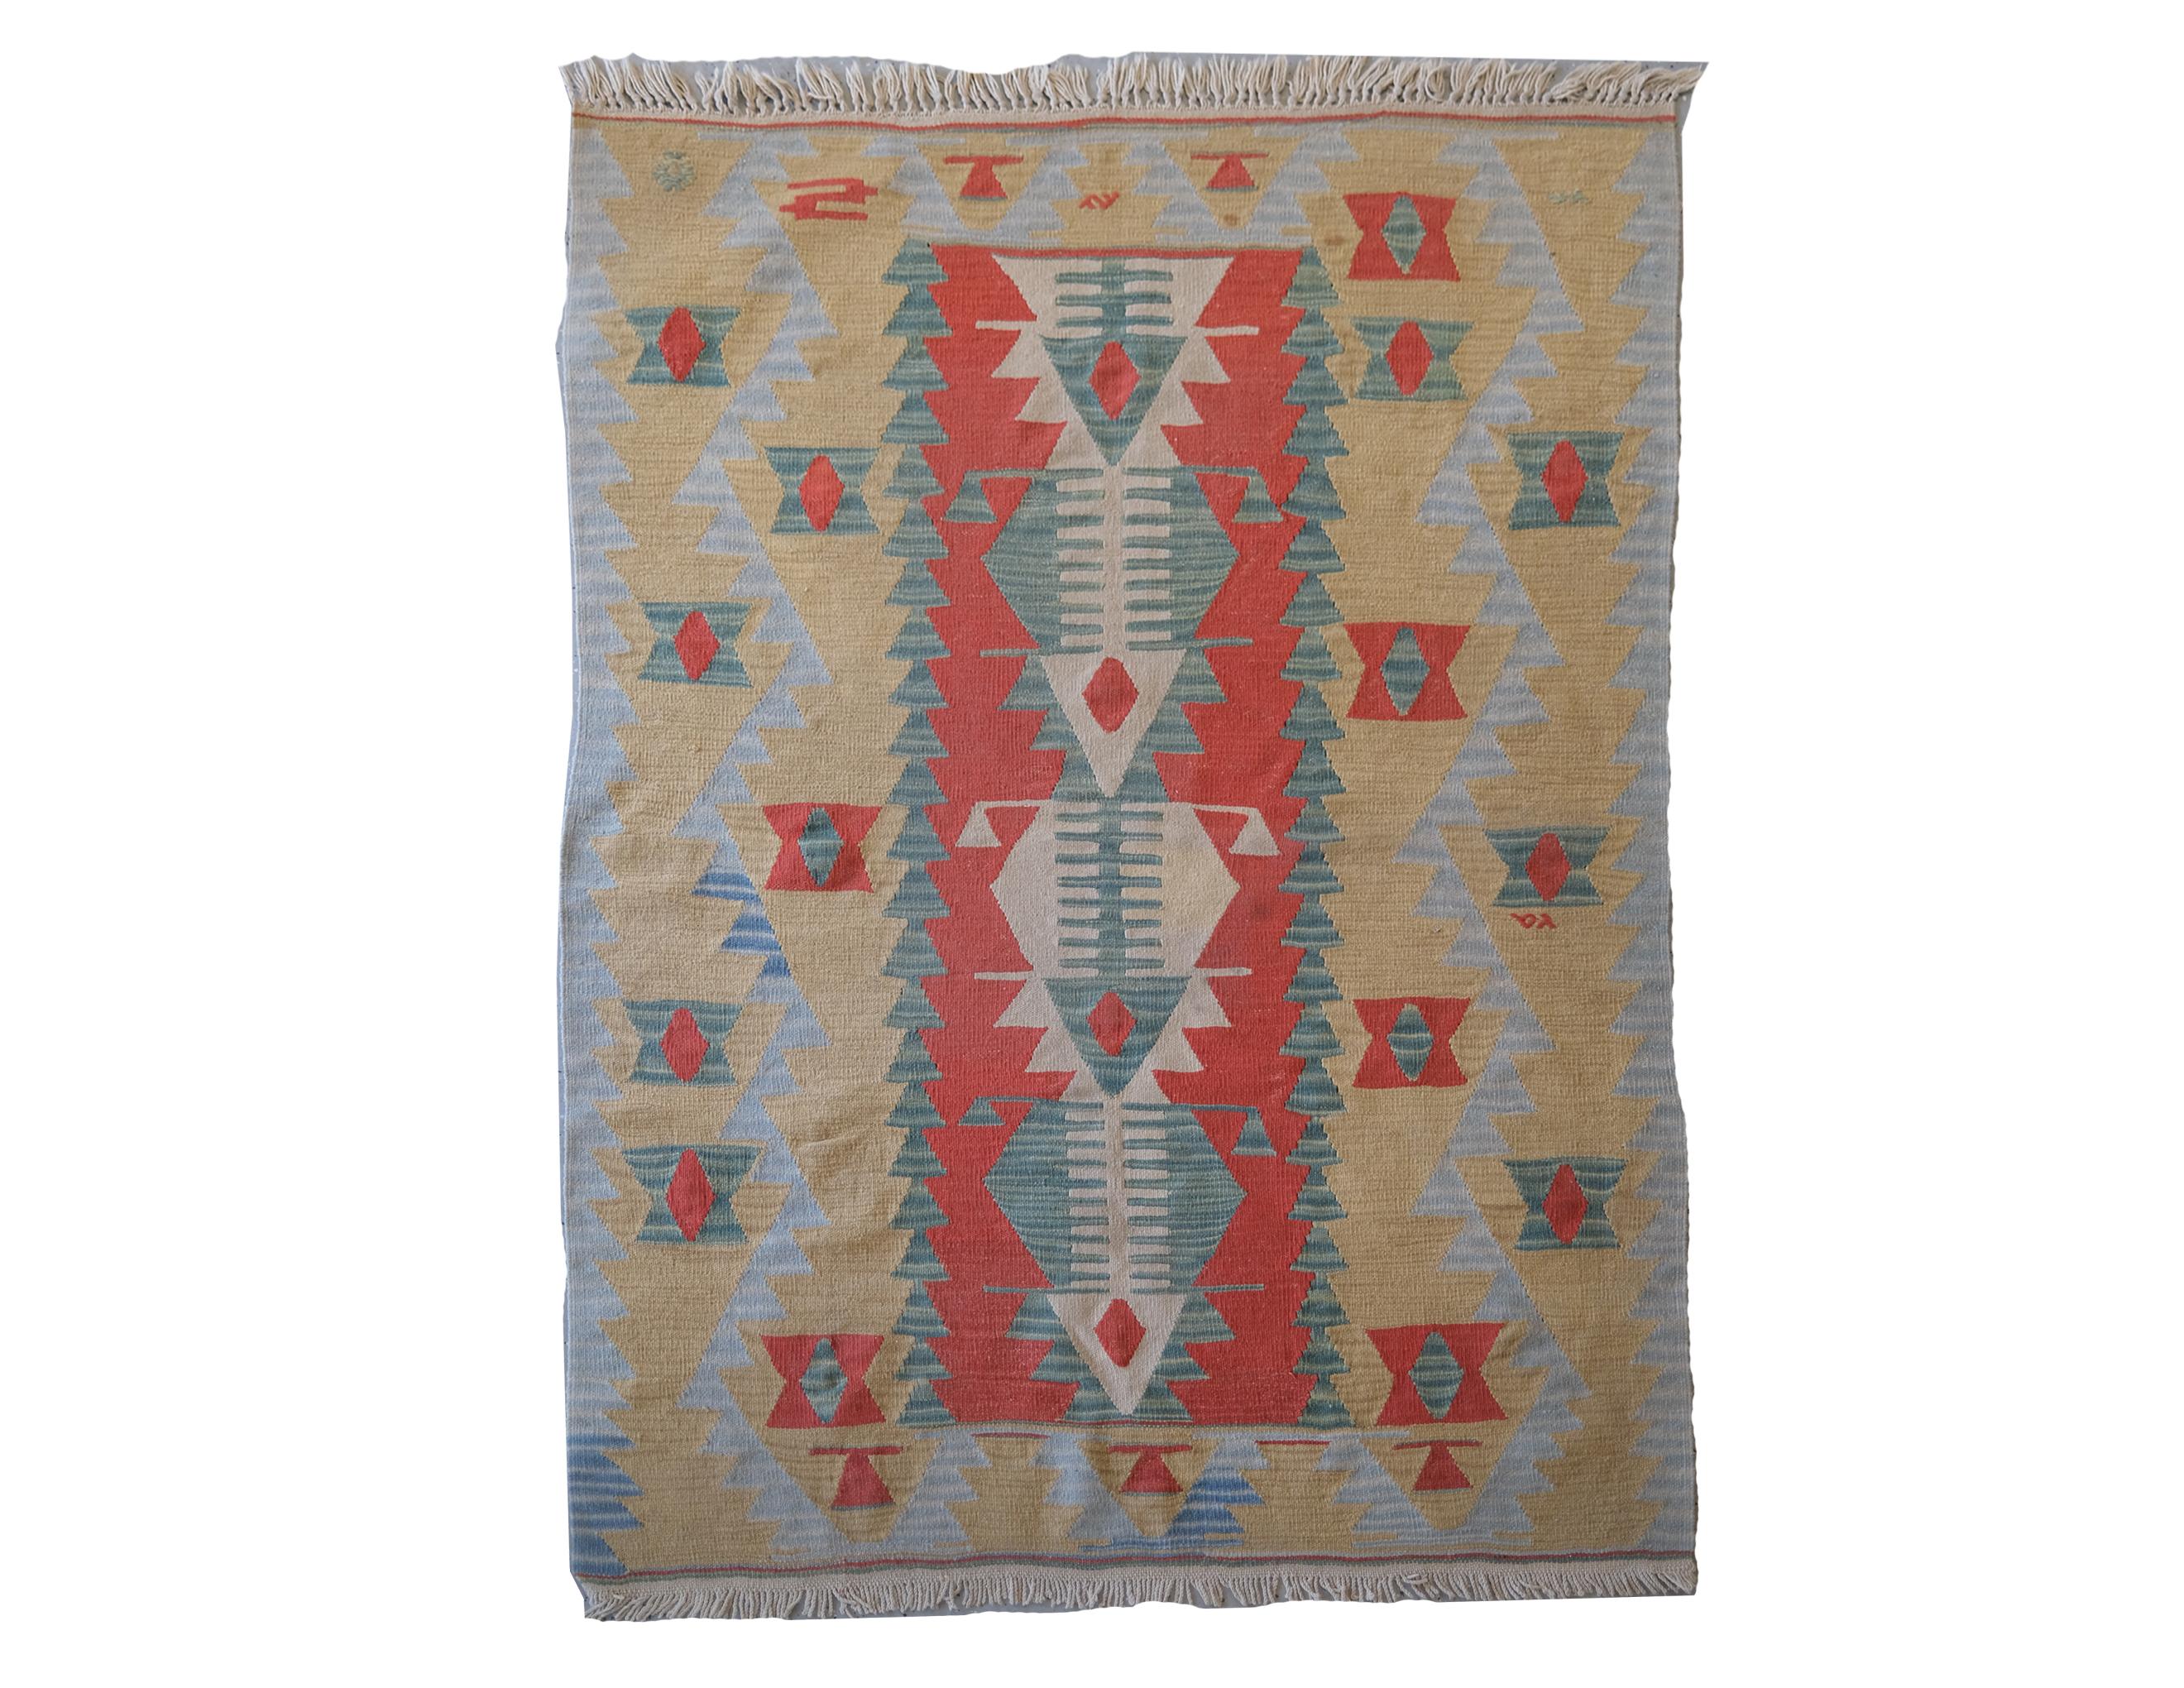 Flat-weave rug with geometric pattern of green, tan, and red.